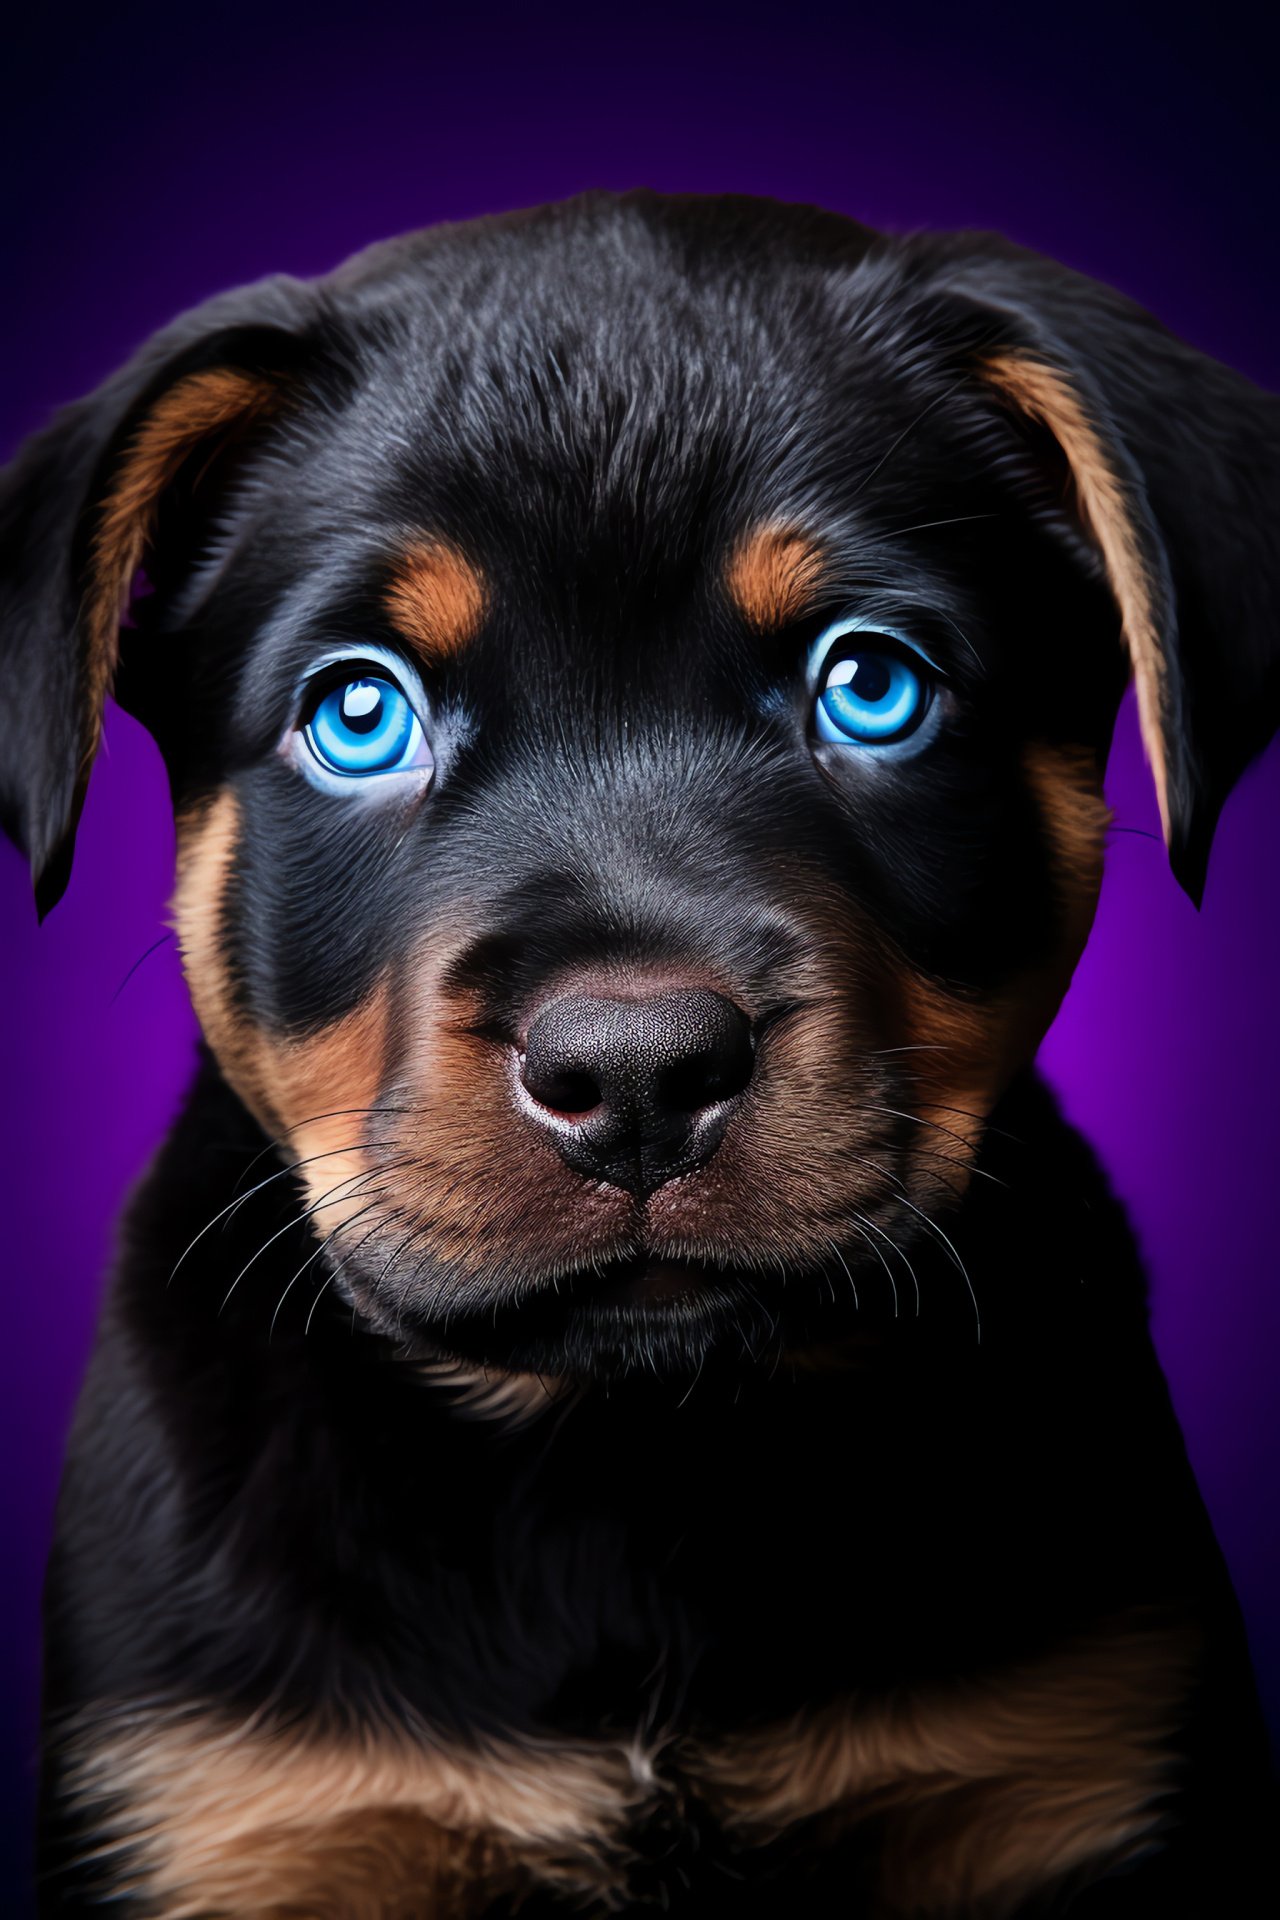 Rottweiler Puppy gaze, Intense blue eyes, Canine features, Expressive face, Young Rottweiler, HD Phone Image